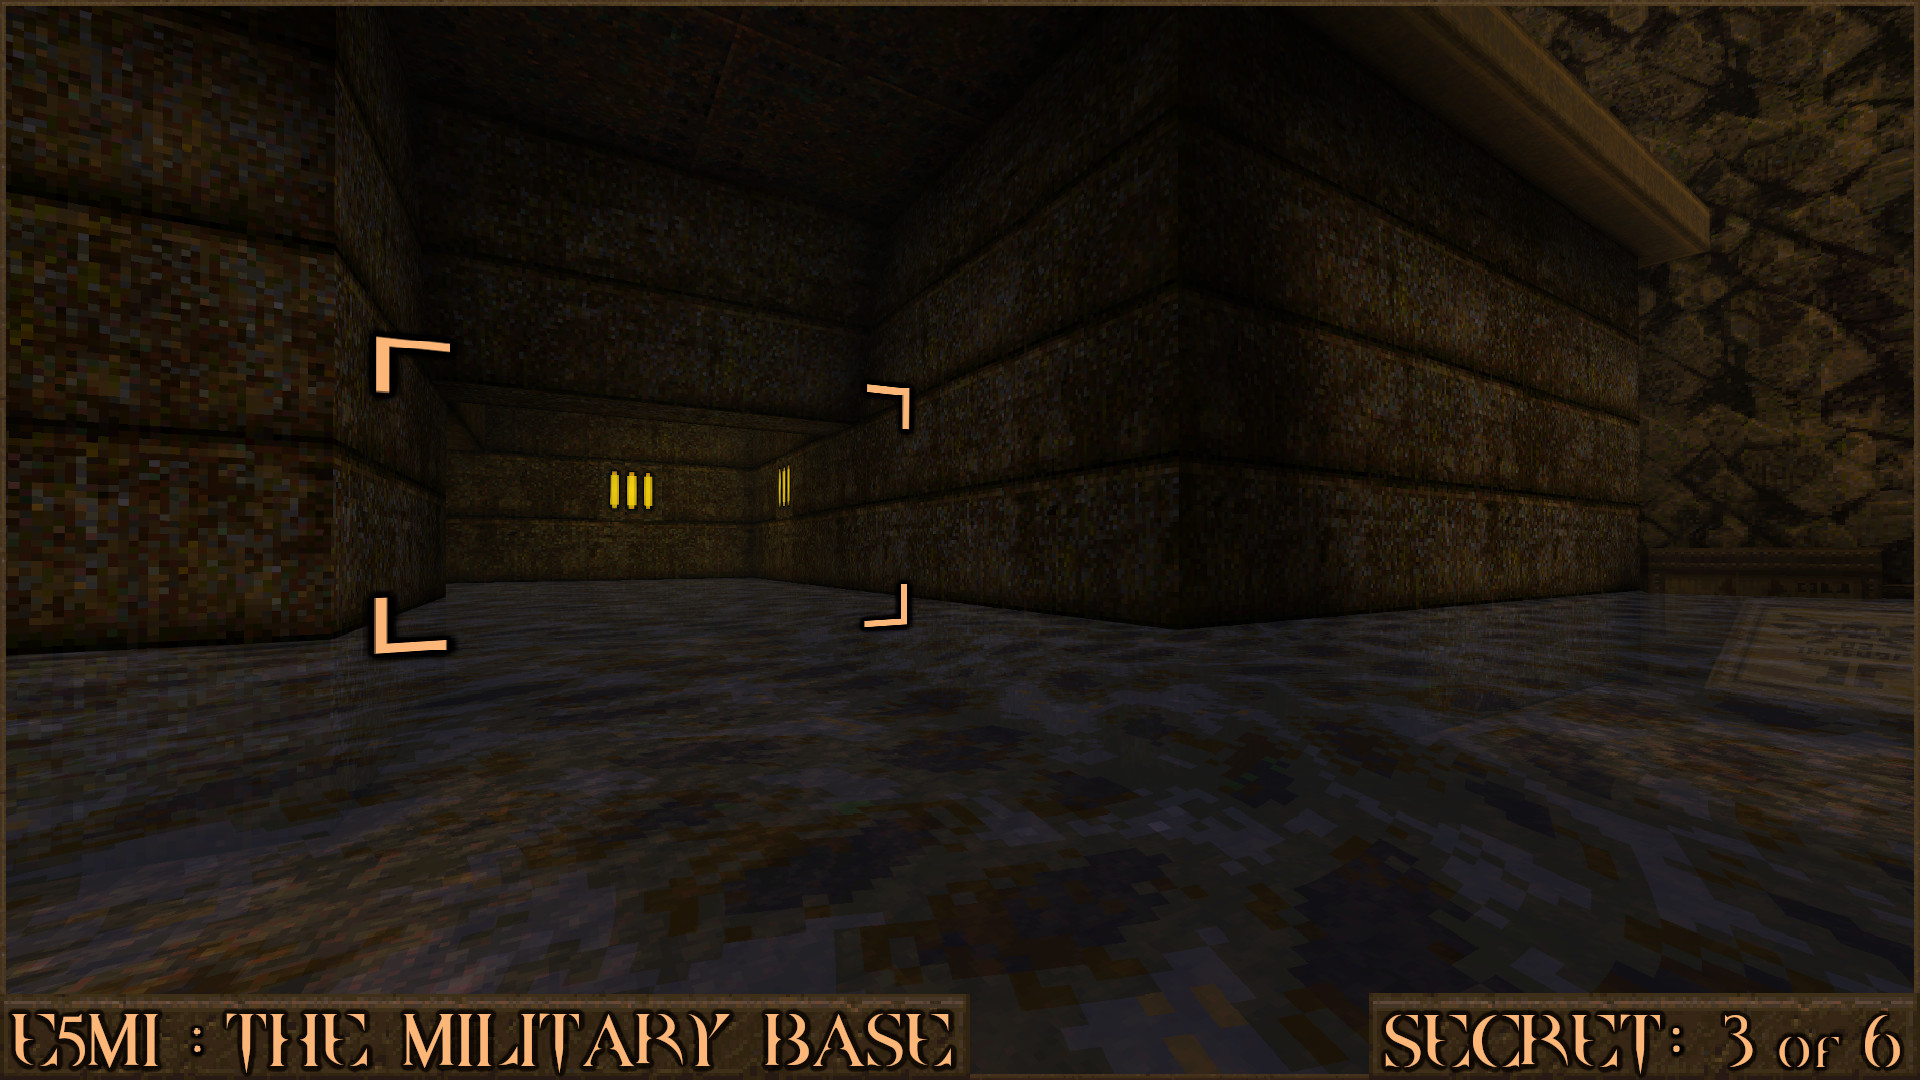 Quake Finding All Secrets in Quake Expansion pack: Dimension of the Past - E5M1: The Military Base - ABB7D8C